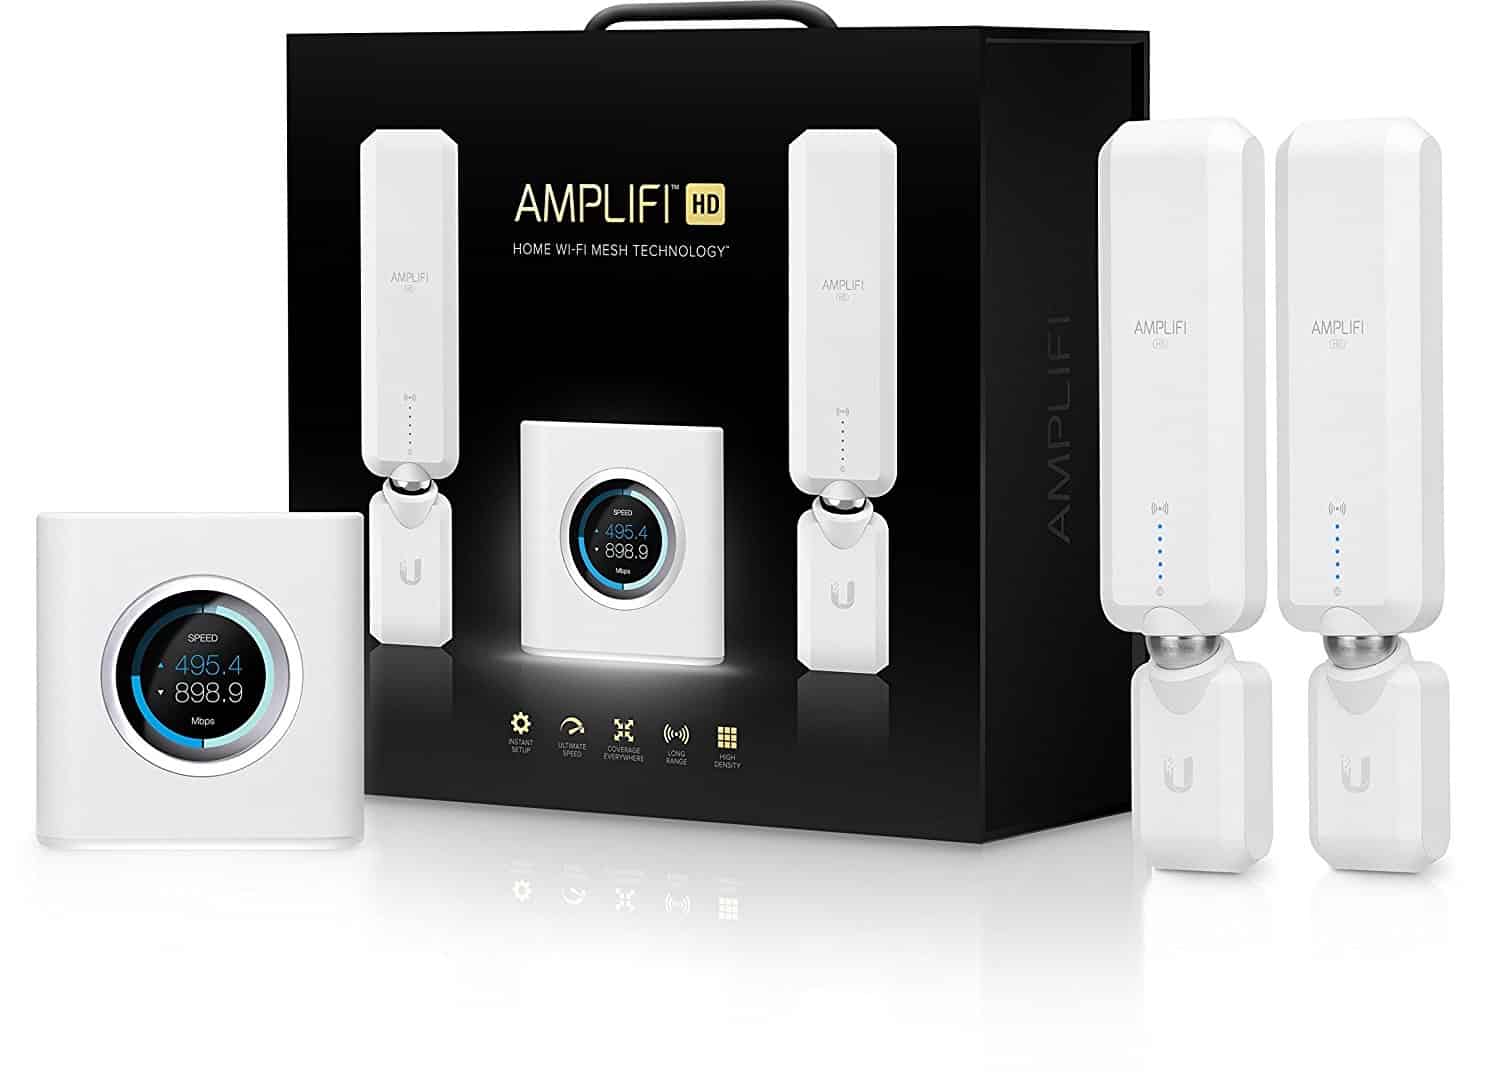 Amplifi's Base Station and Mesh Points have a very distinctive look.